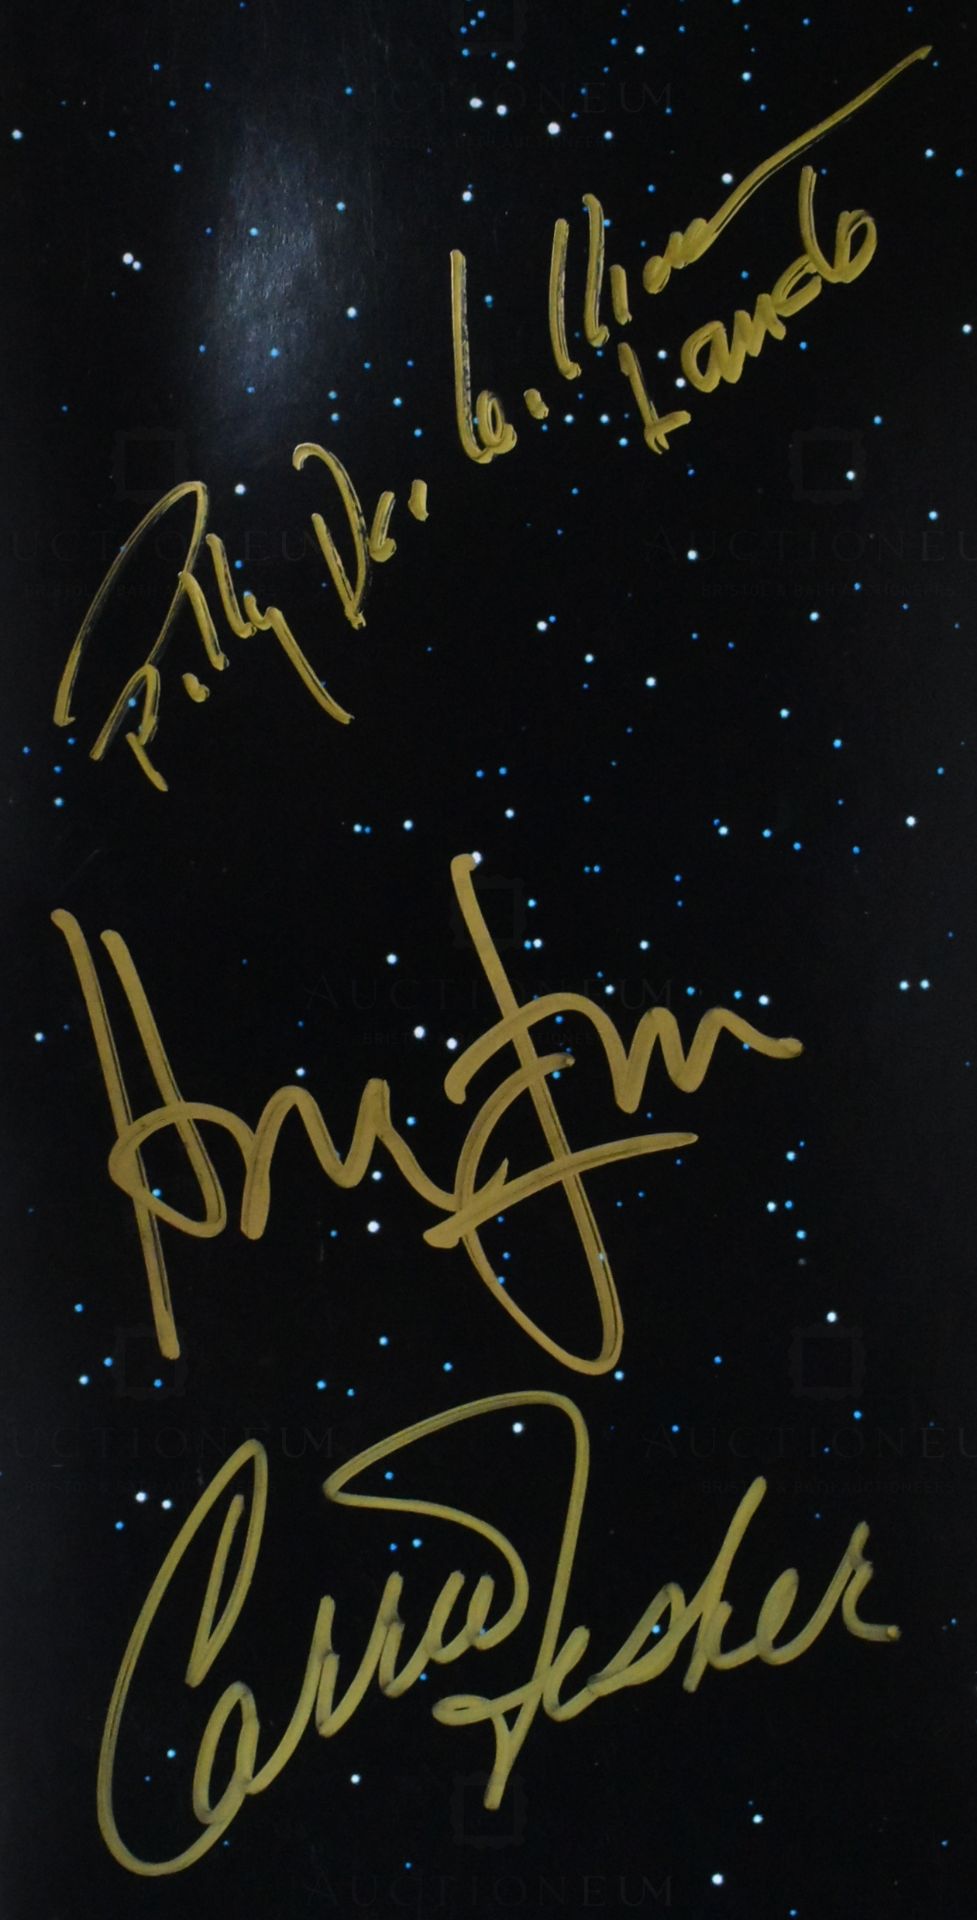 STAR WARS - SPECIAL EDITIONS - MAIN CAST SIGNED POSTER - PSA / DNA - Image 2 of 8